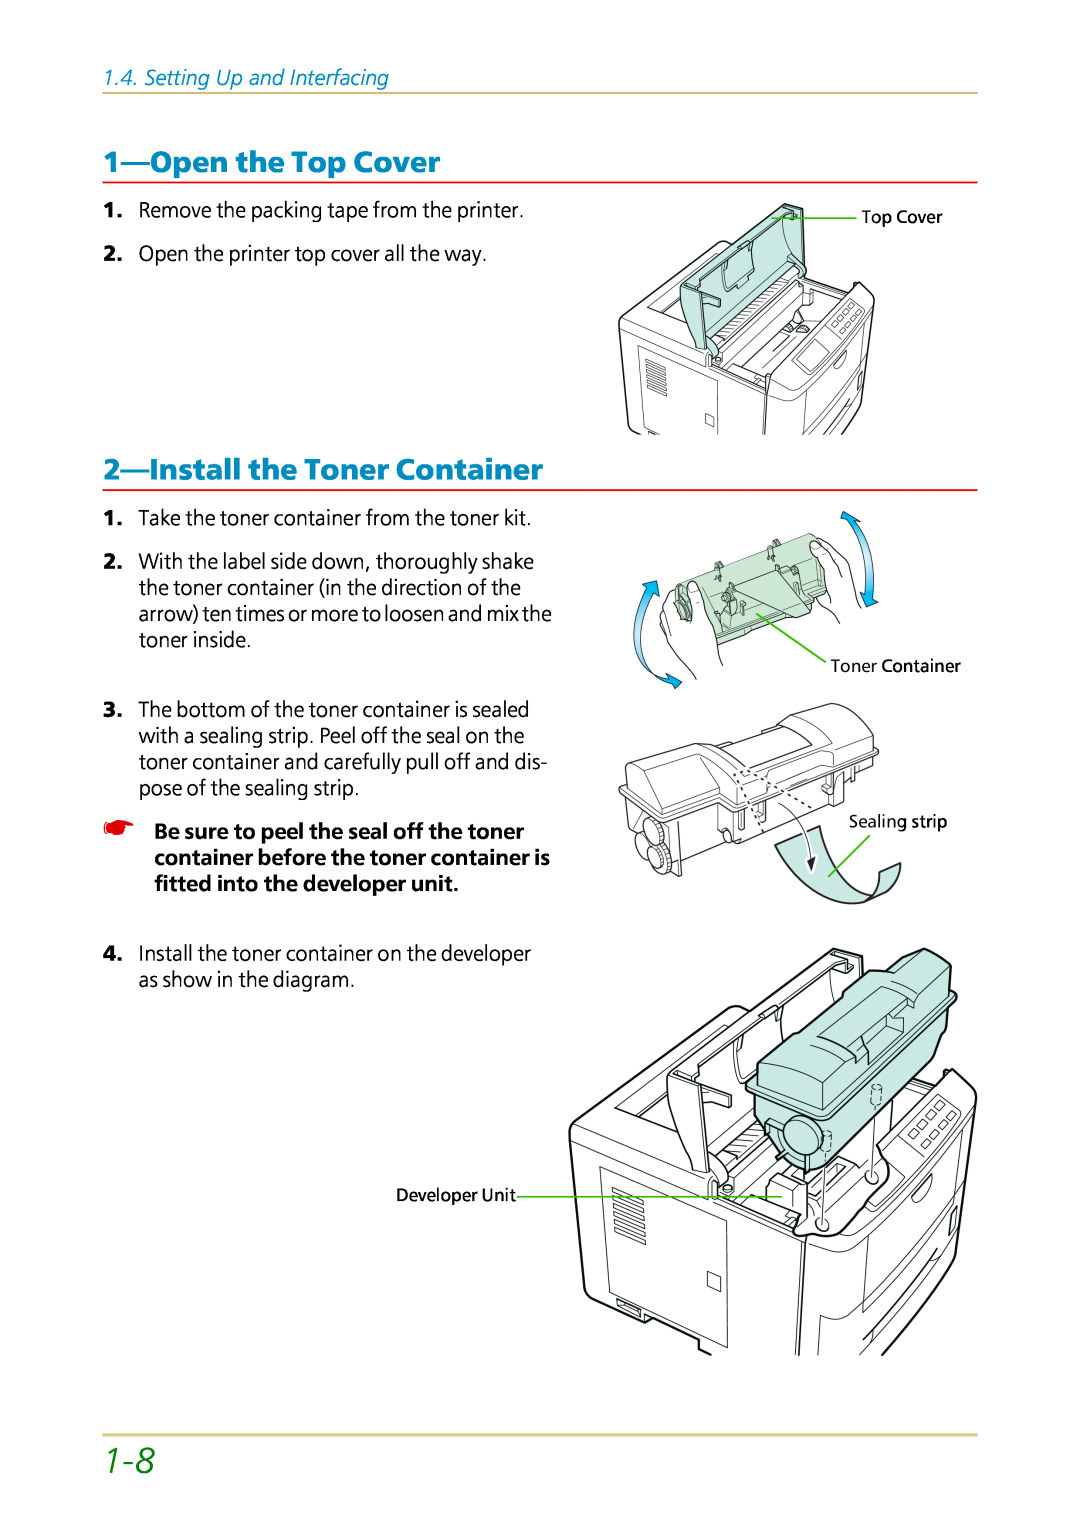 Kyocera FS-1700 user manual 1—Openthe Top Cover, 2—Installthe Toner Container, Setting Up and Interfacing 